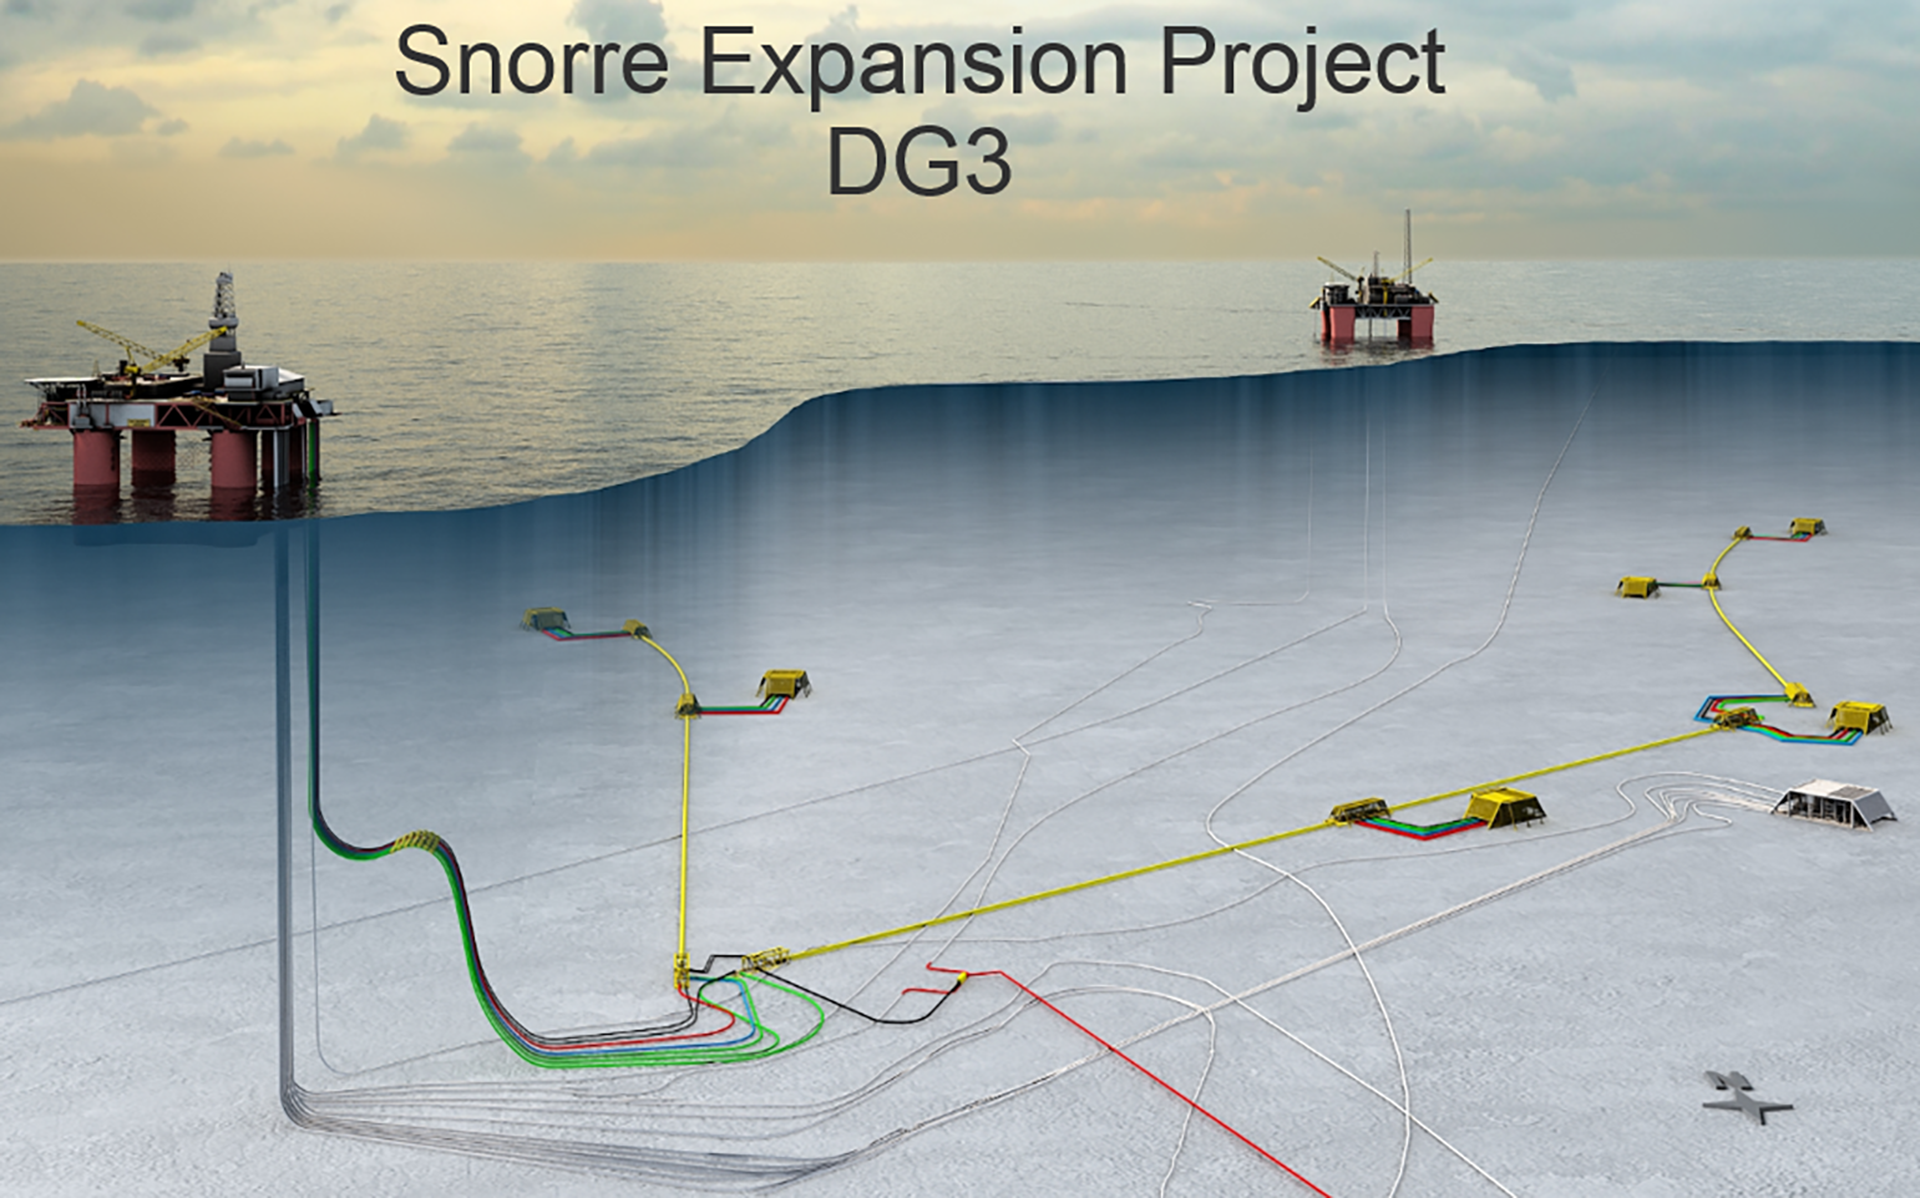 One of the largest projects for improved recovery will be implemented on the Snorre field in the North Sea. The subsea development consists of six subsea templates, each with four wells. The plan is to have twelve wells for production and twelve wells for water and gas injection. The development facilitates tie-in of additional subsea templates. (Illustration: Statoil)